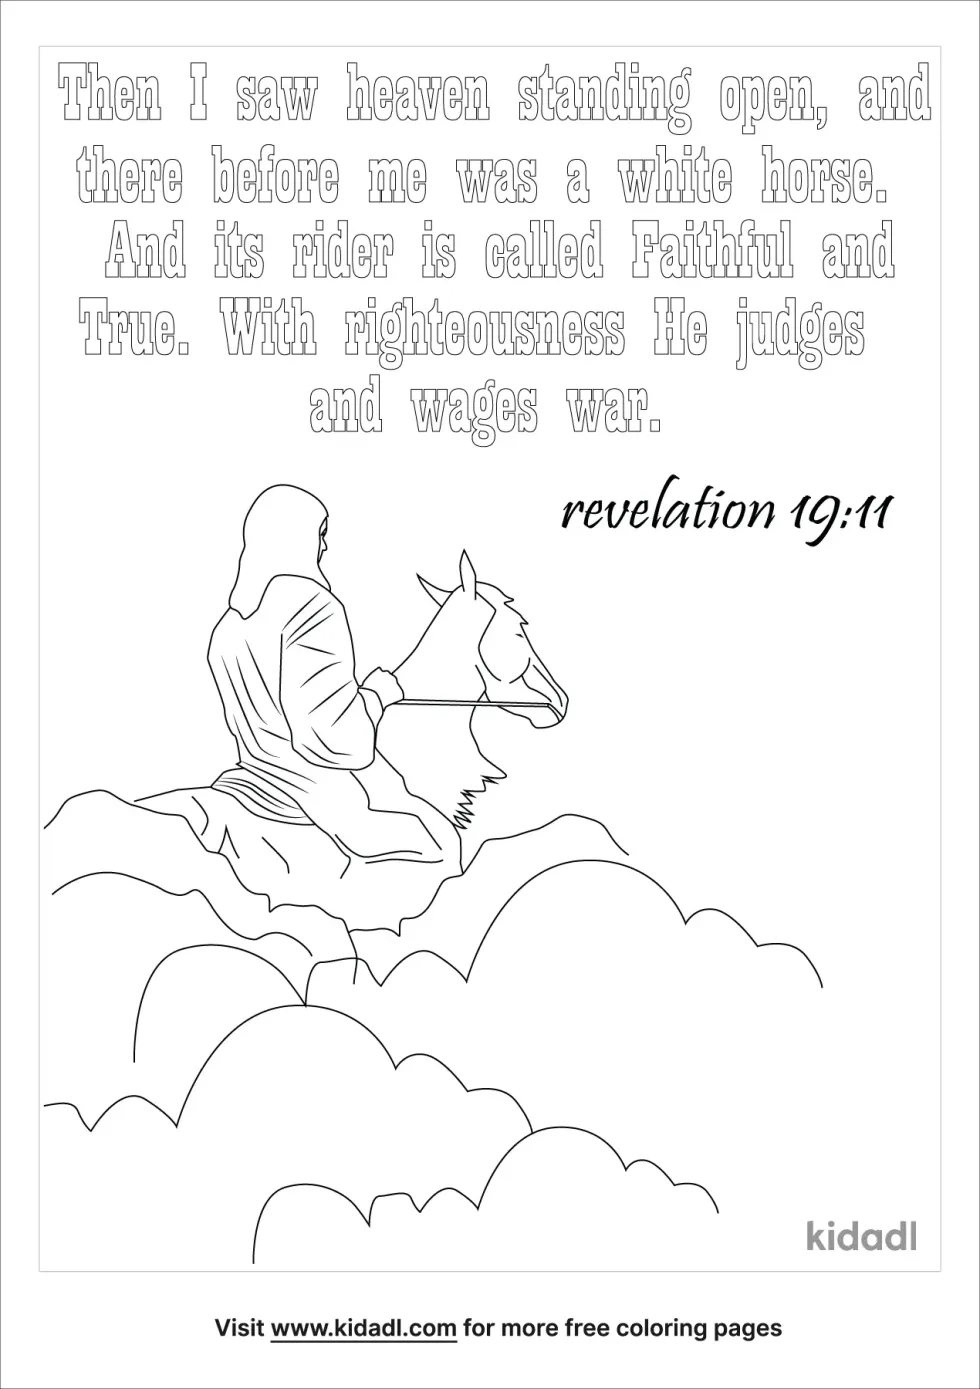 Revelation 19:11 Coloring Page